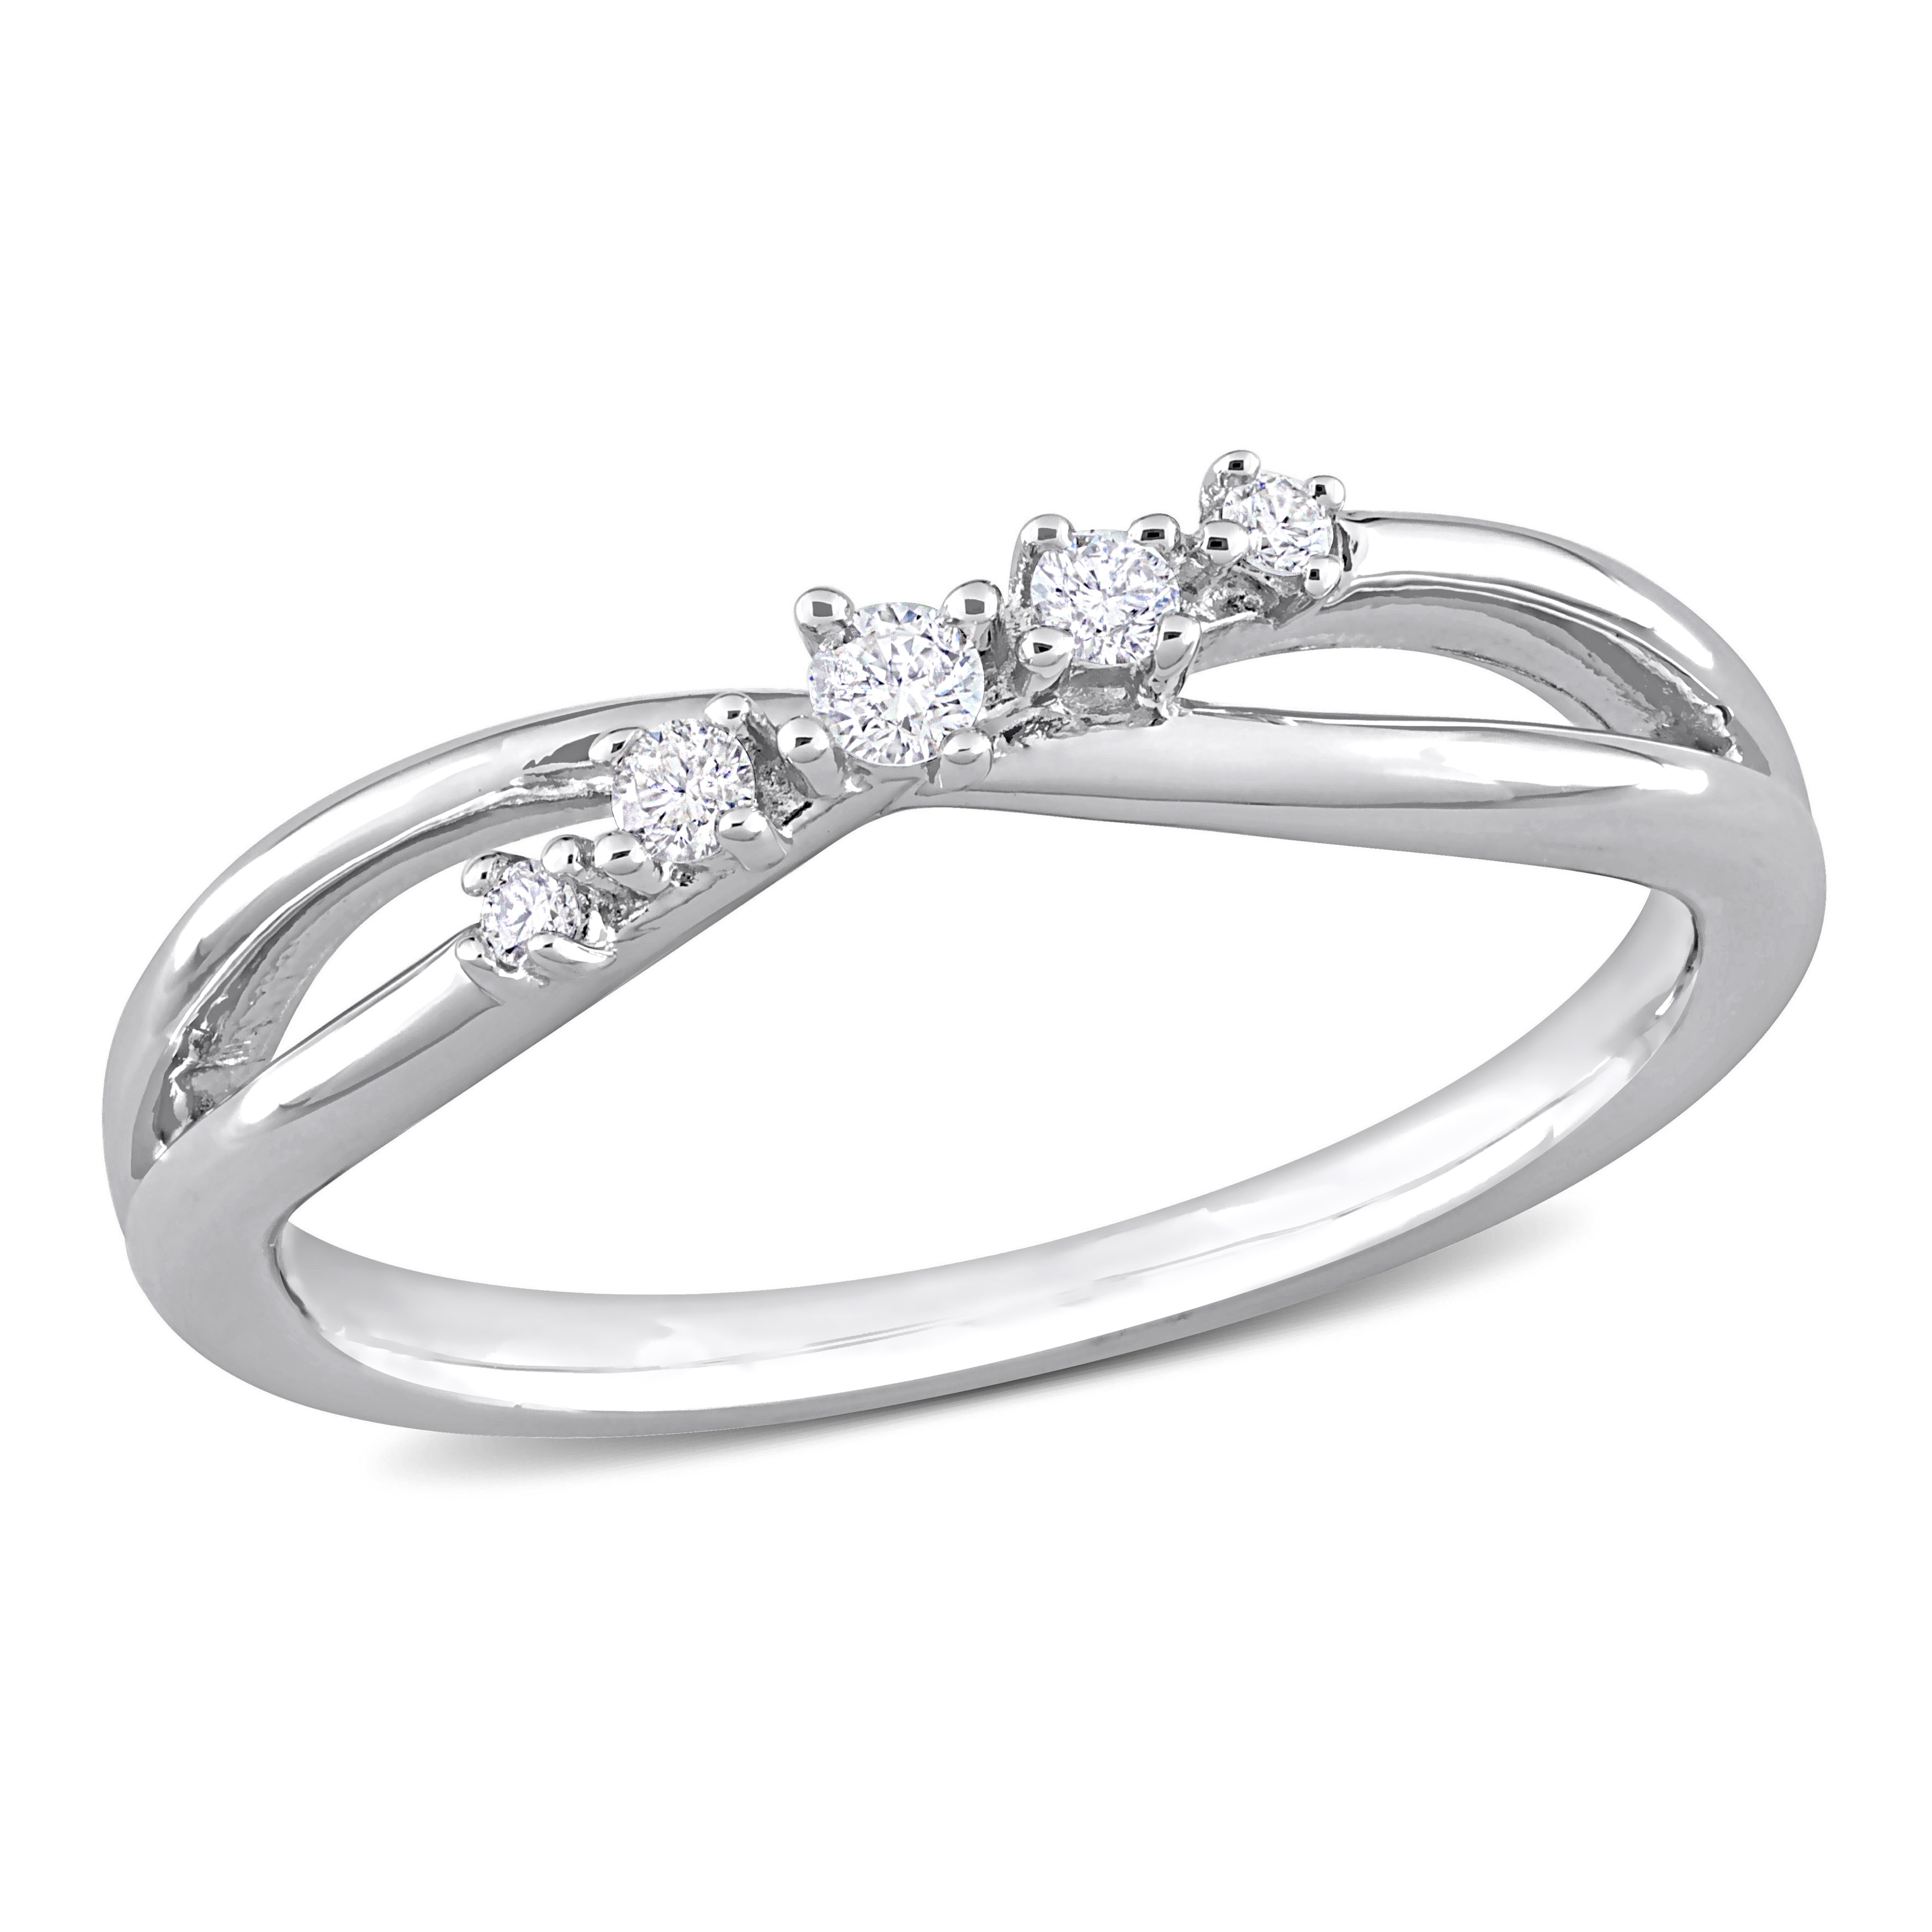 1/10 CT TDW Diamond Bypass Ring in Sterling Silver